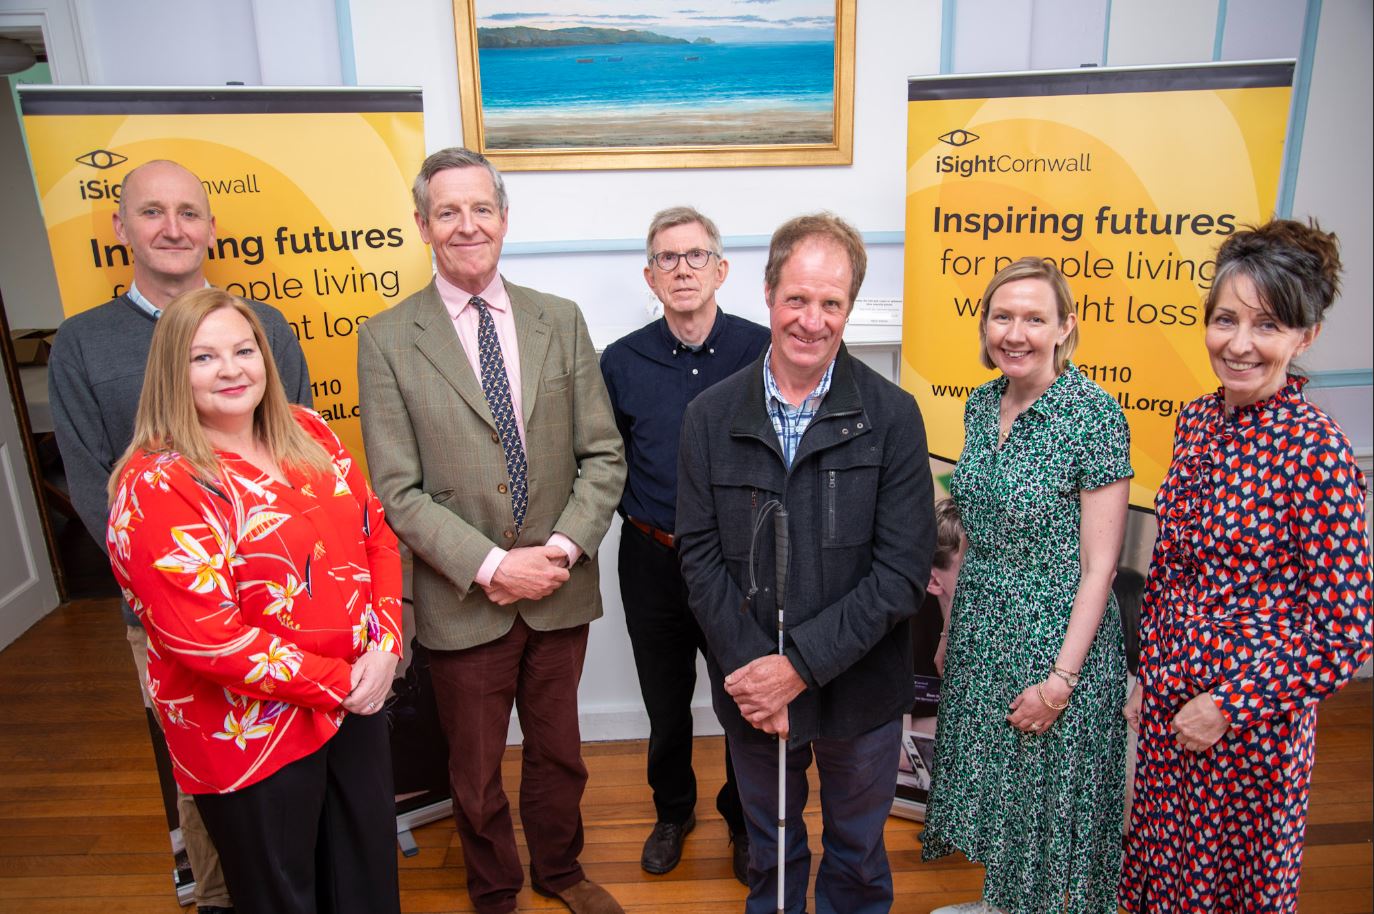 Seven people stand in front of bright yellow iSightCornwall banners, smiling at the camera.